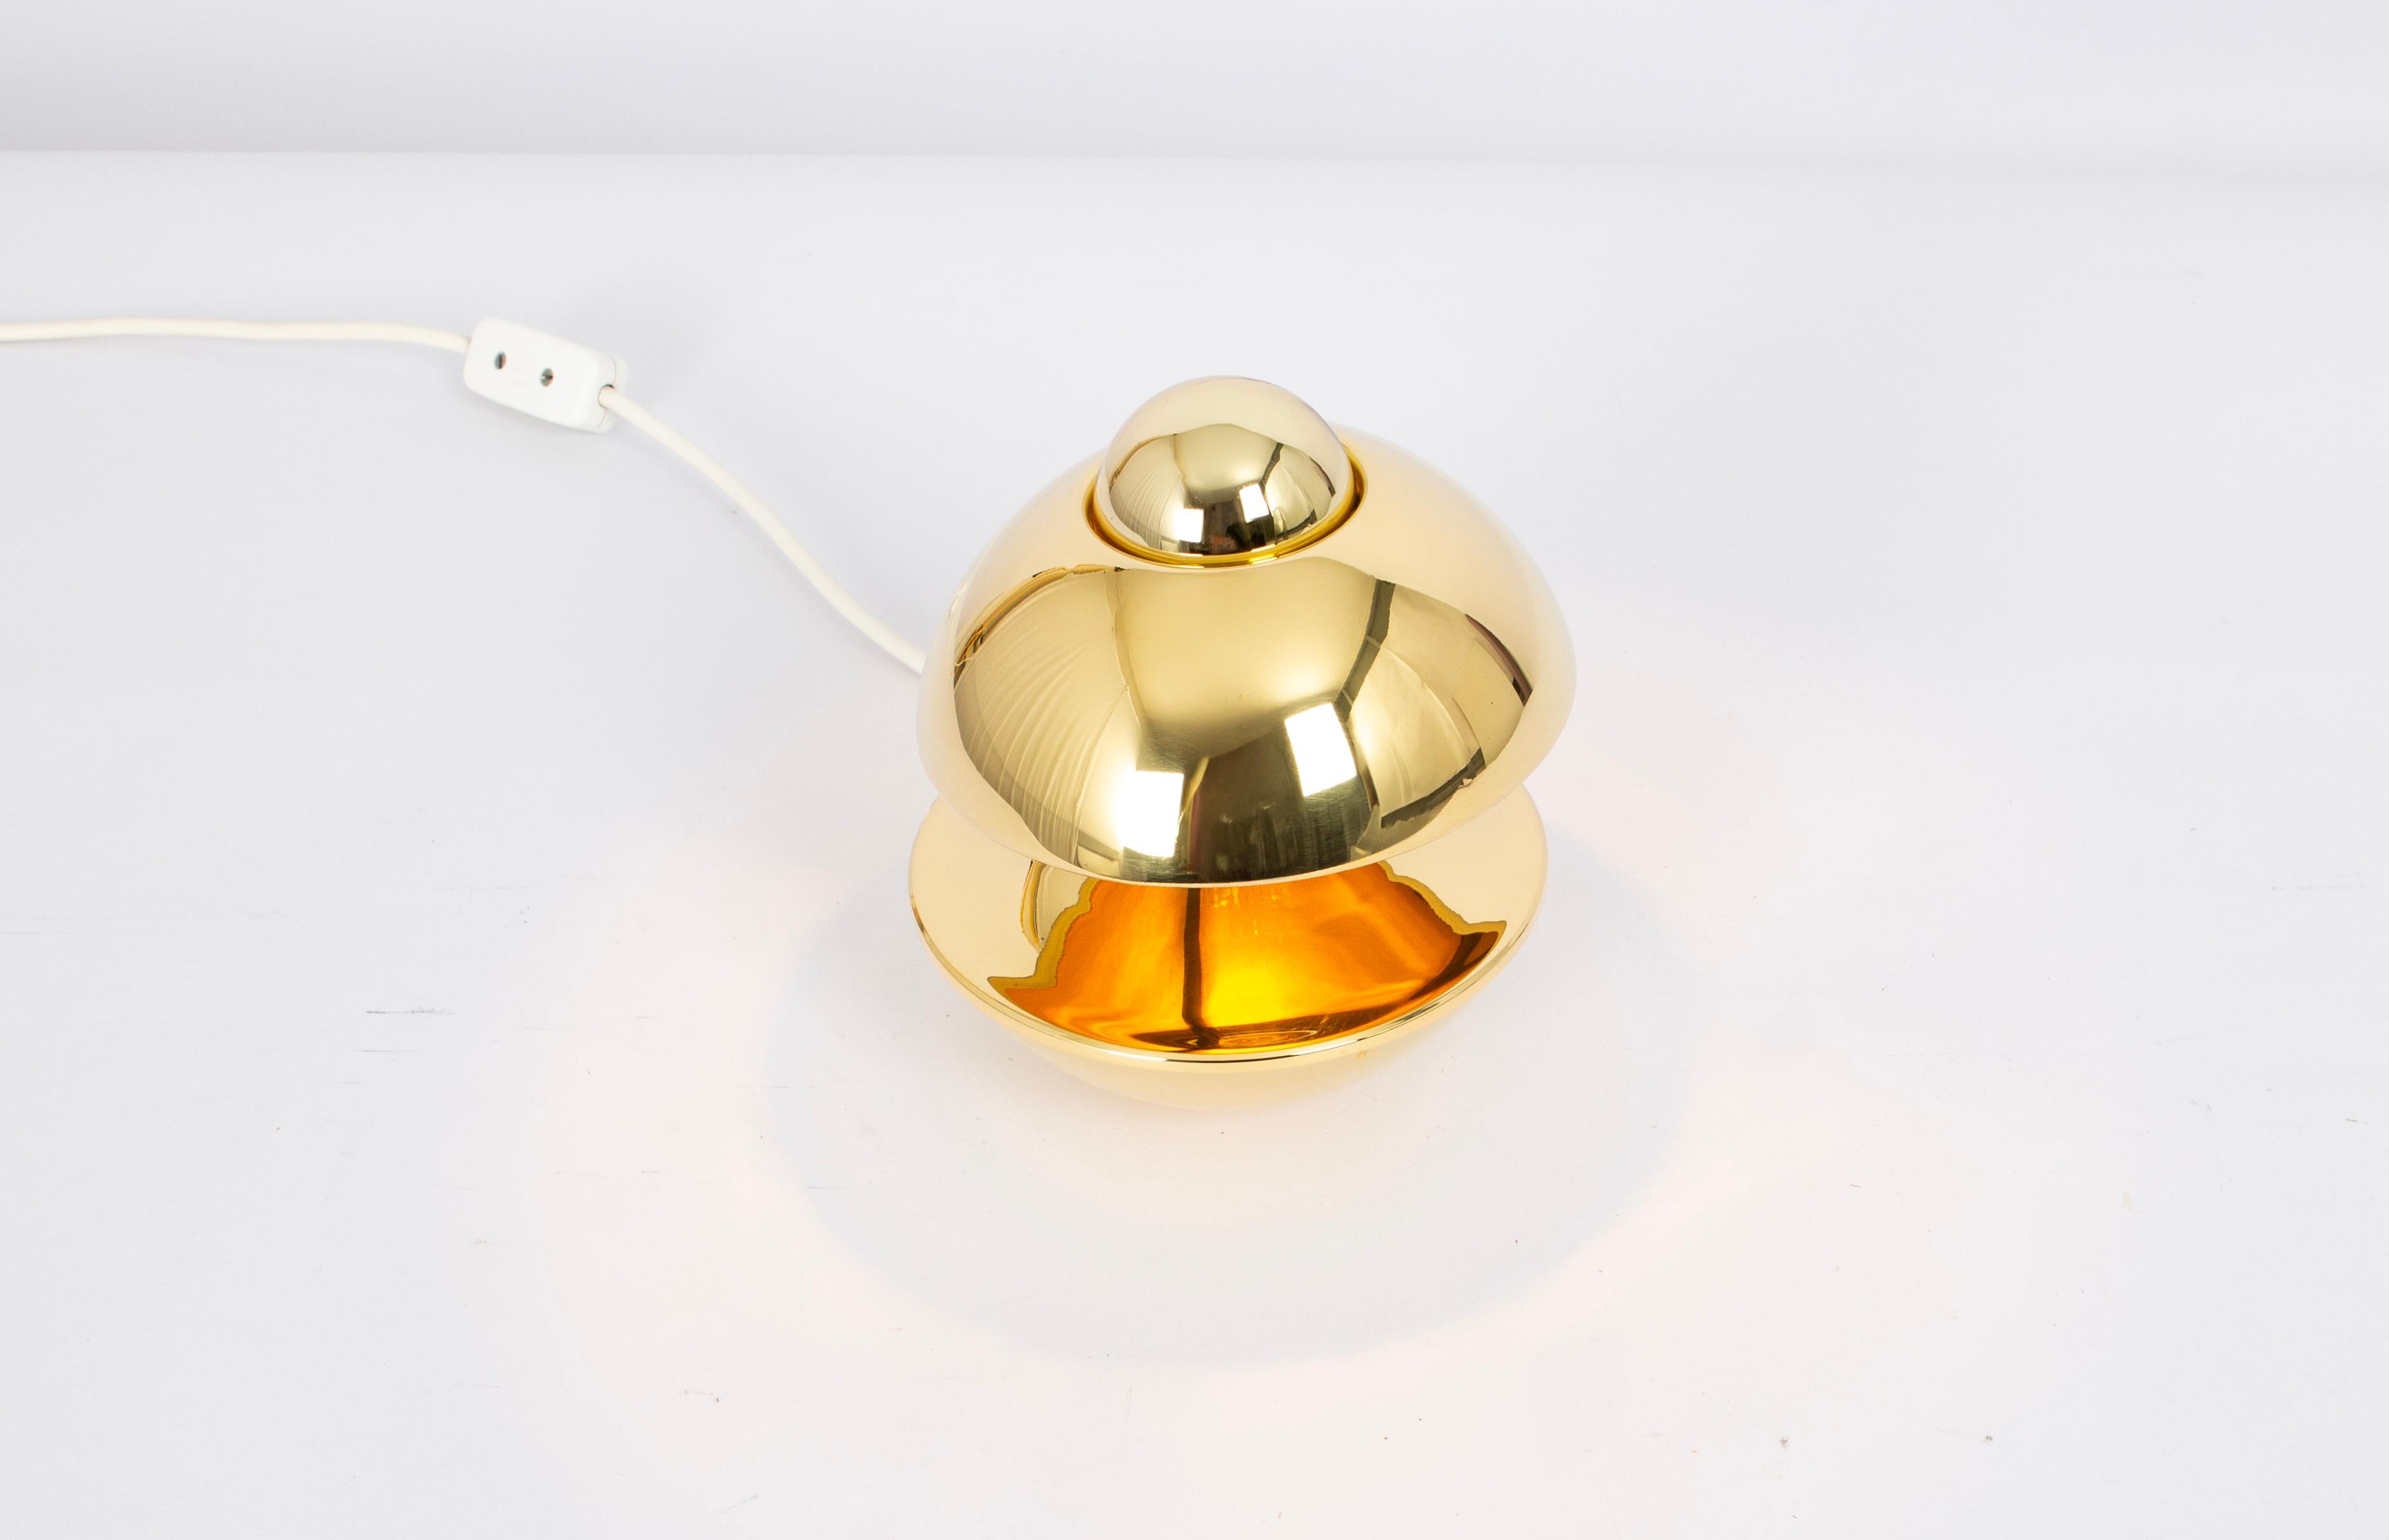 Petite Brass Table lamp made by Kaiser, Germany, 1970s
Designer: Klaus Hempel
Wonderful form and stunning light effect.
This Model won the IF Product Design Award 1972
Sockets: 1 x E14 small bulbs. (40 W max each).
Light bulbs are not included. It